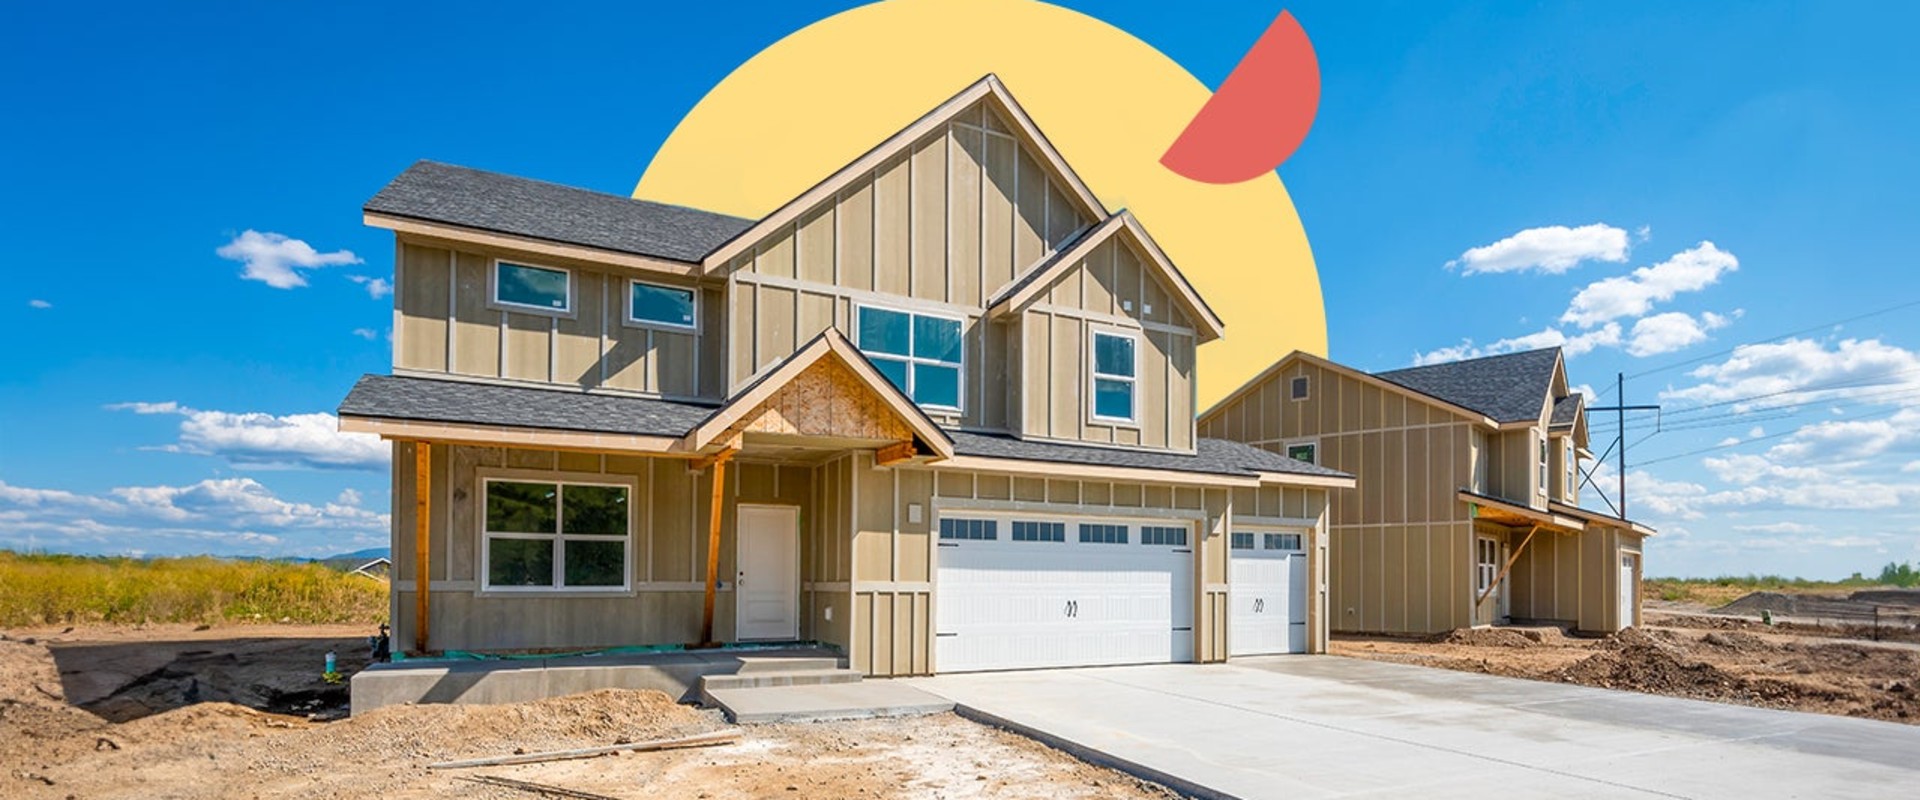 The Pros and Cons of New Construction for Your Home